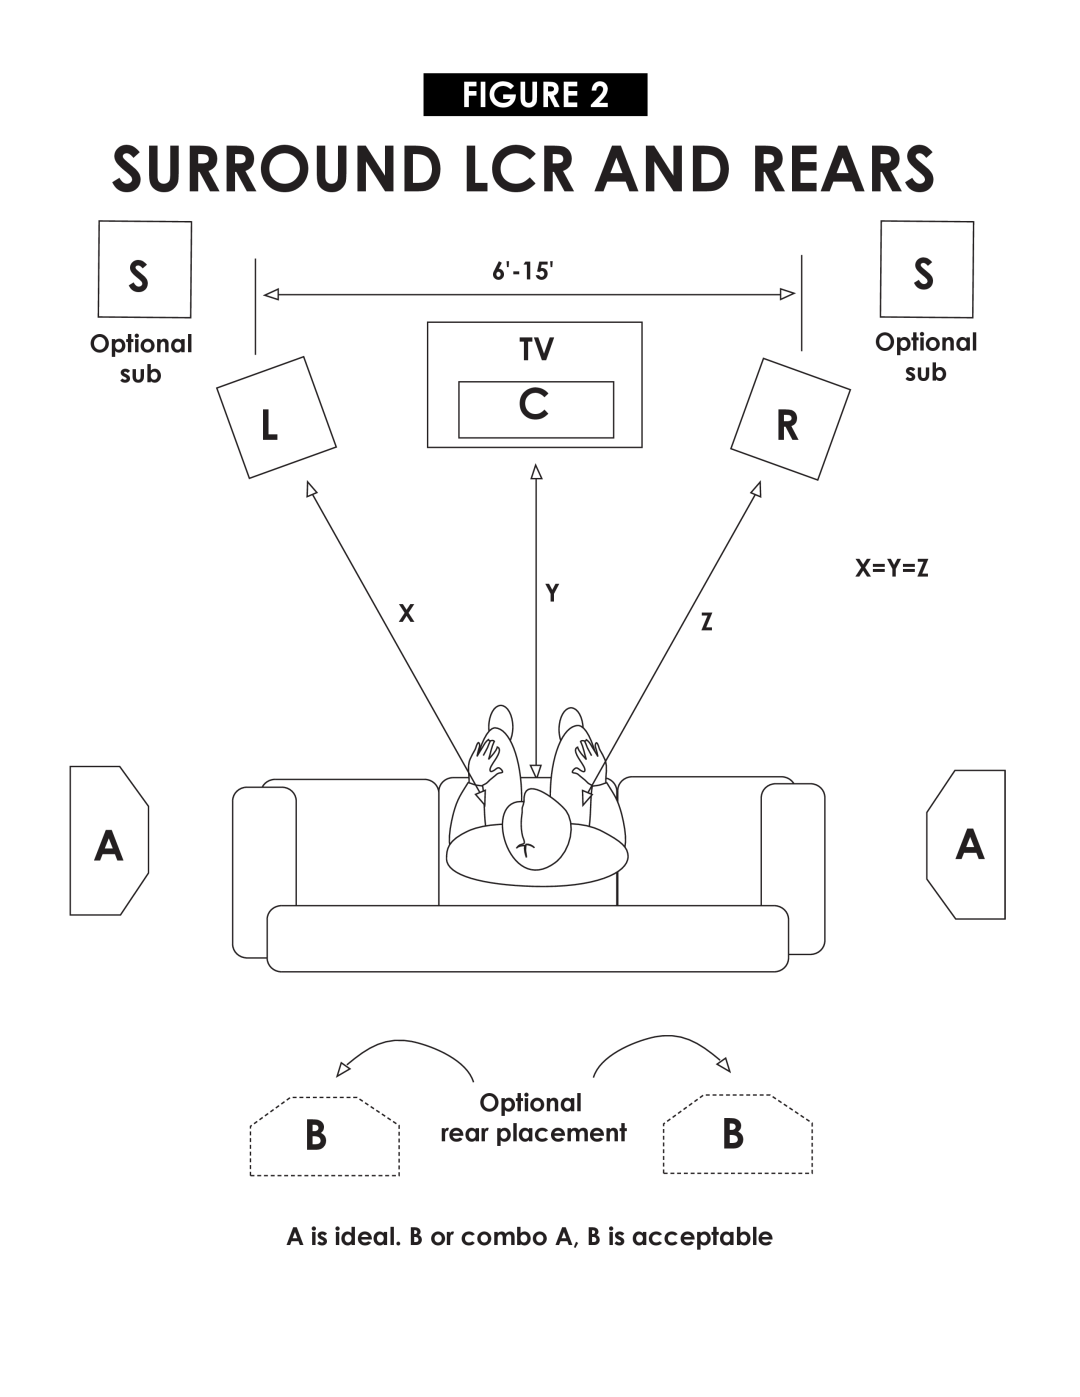 Klipsch POWERED SUBWOOFERS owner manual Surround Lcr And Rears, 6-15, Optional sub X=Y=Z, Optional rear placement 